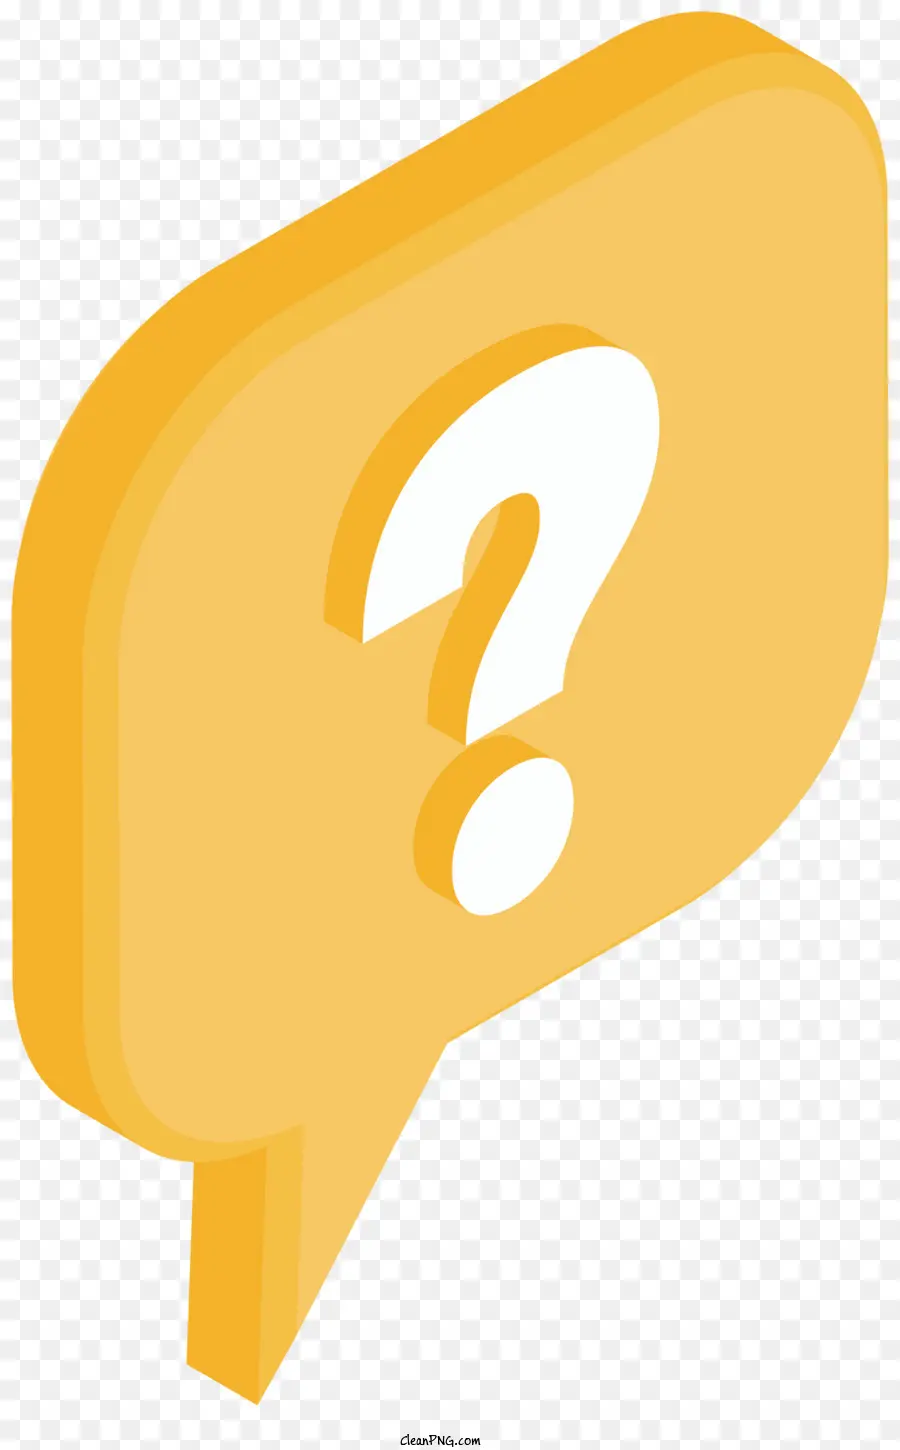 yellow speech bubble white question mark flat design two dimensional style black background